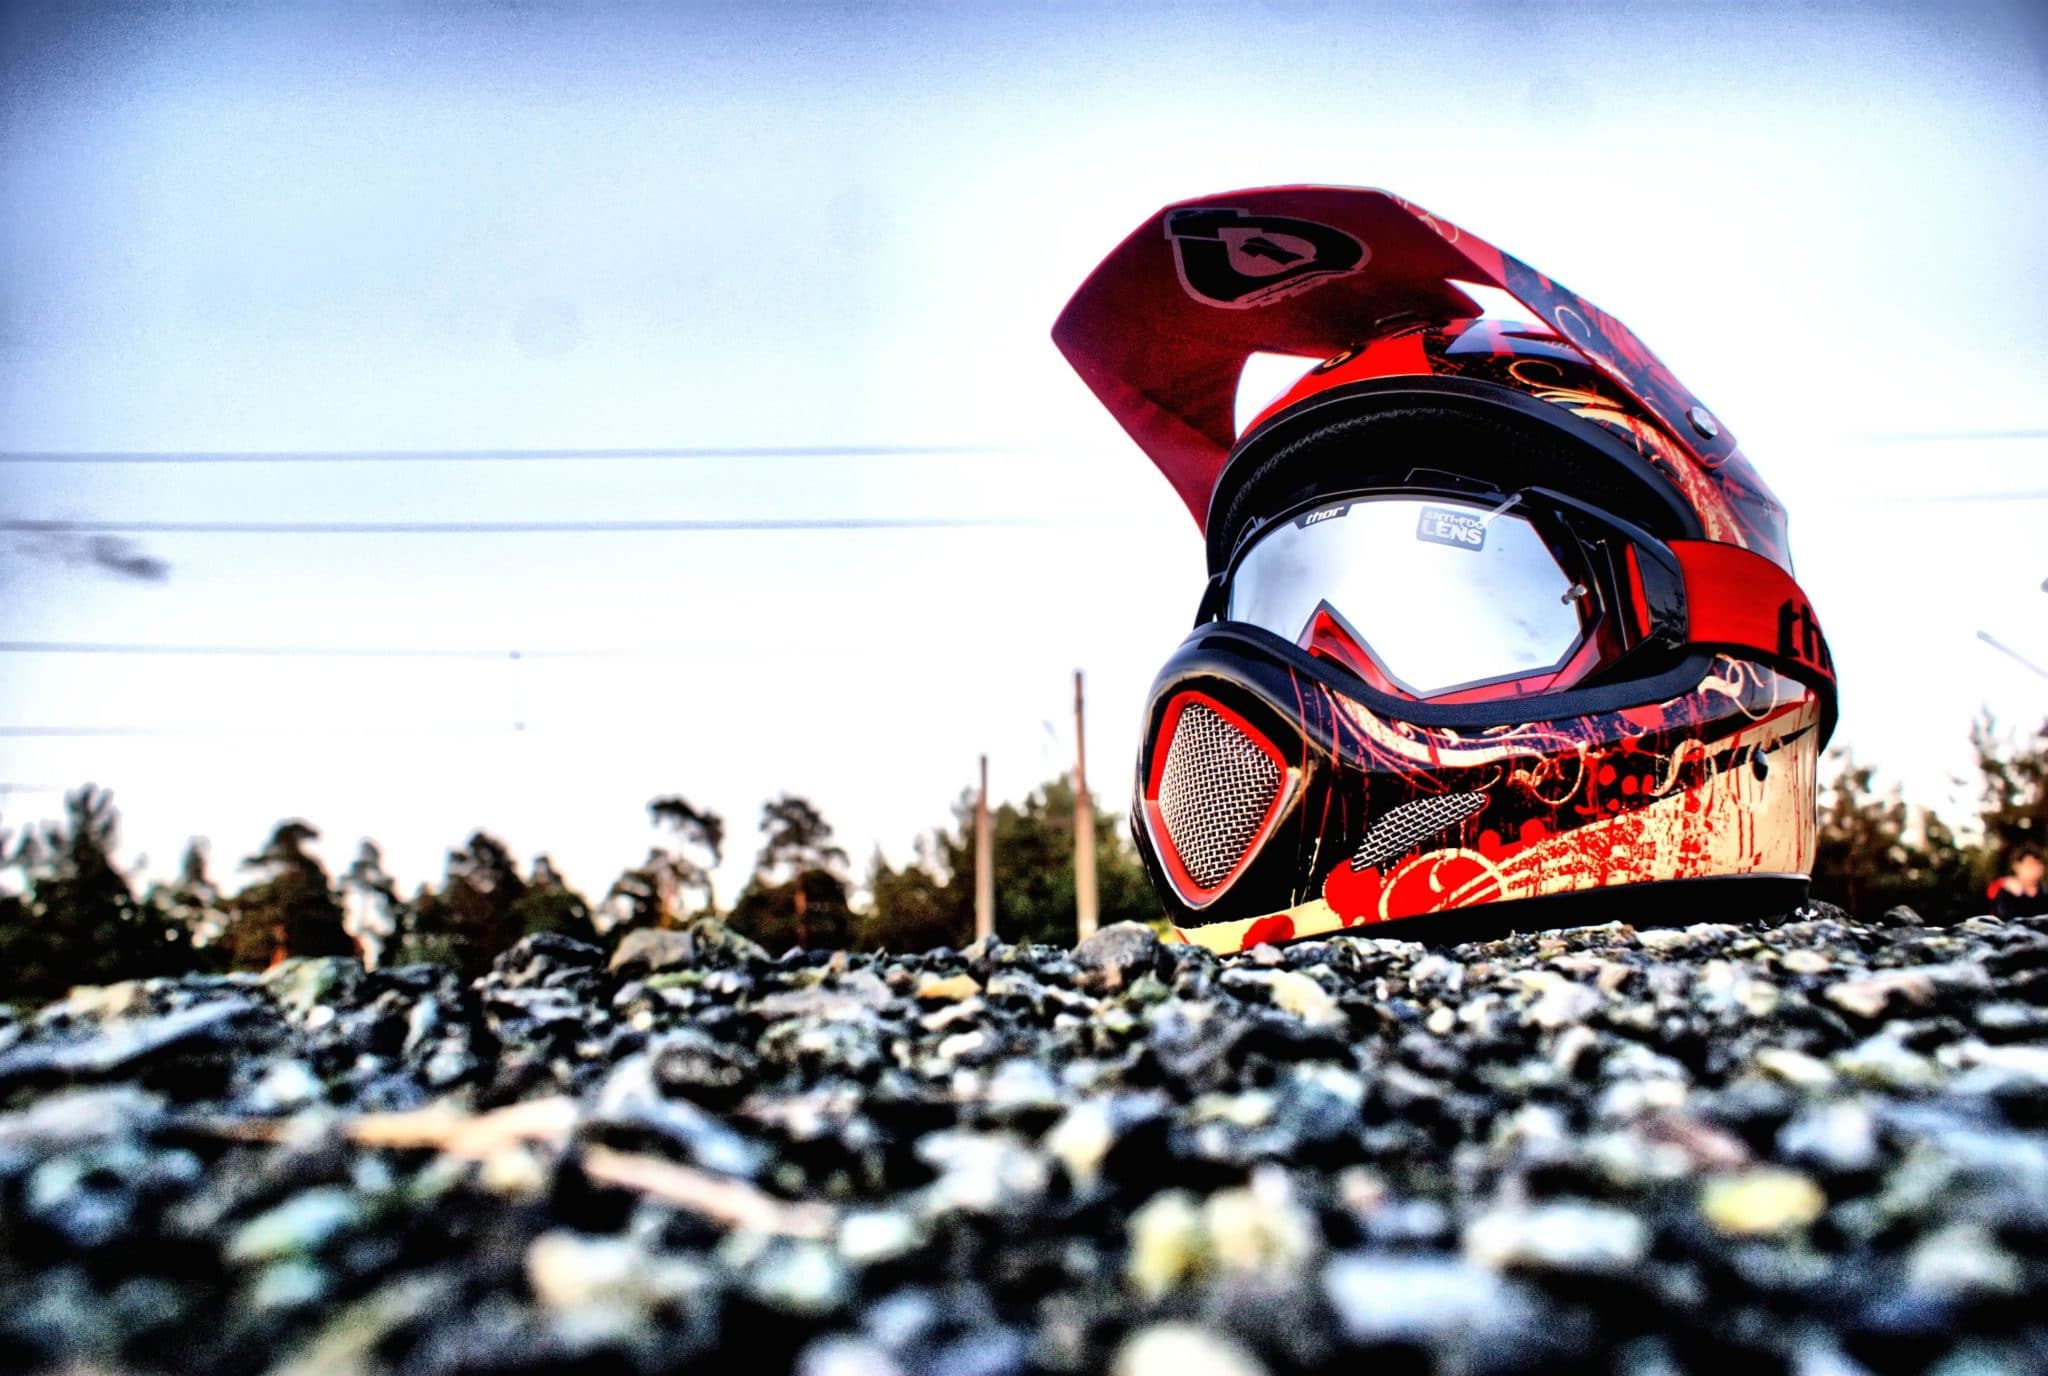 What Are The Differences Between Motocross And Motorcycle Helmets